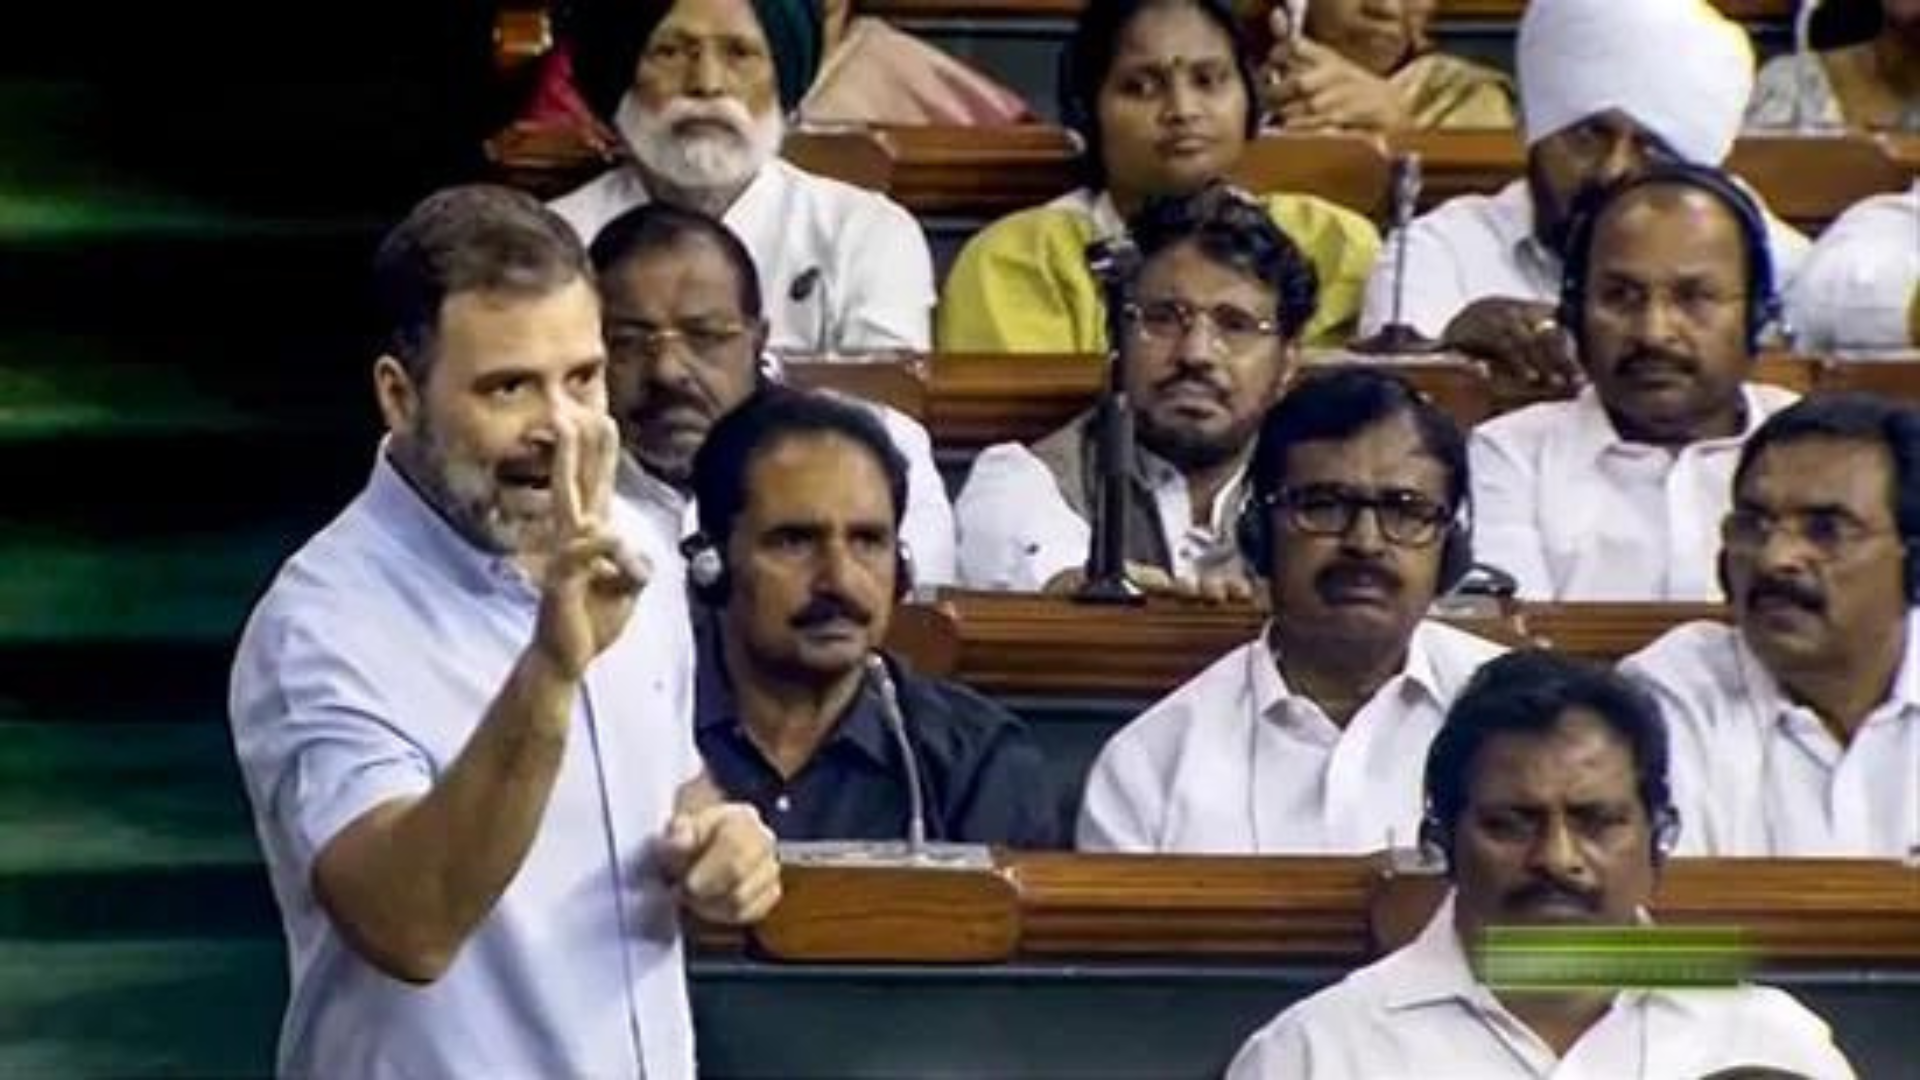 Rahul Gandhi Accuses Self-Proclaimed Hindus of Violence, Highlights Congress's Symbol of Fearlessness